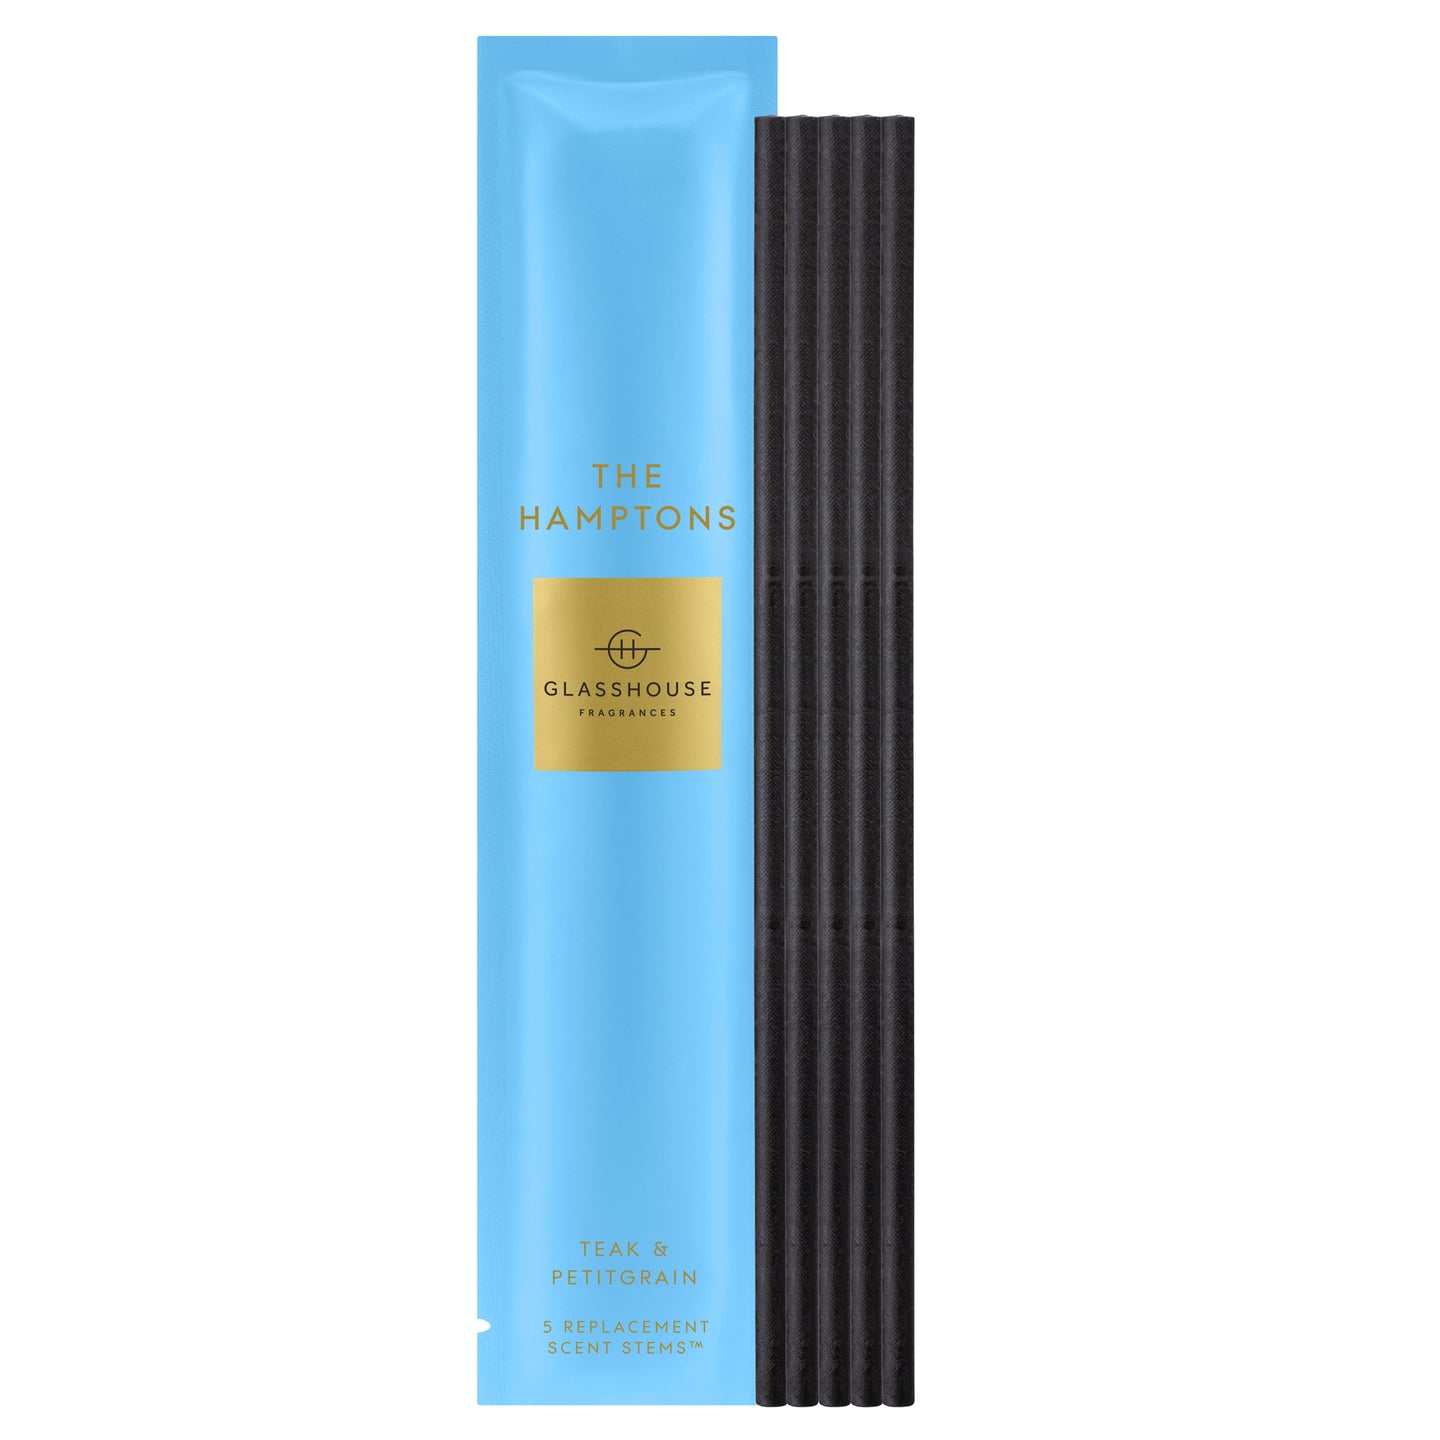 The Hamptons by Glasshouse fragrances Scent-Stems